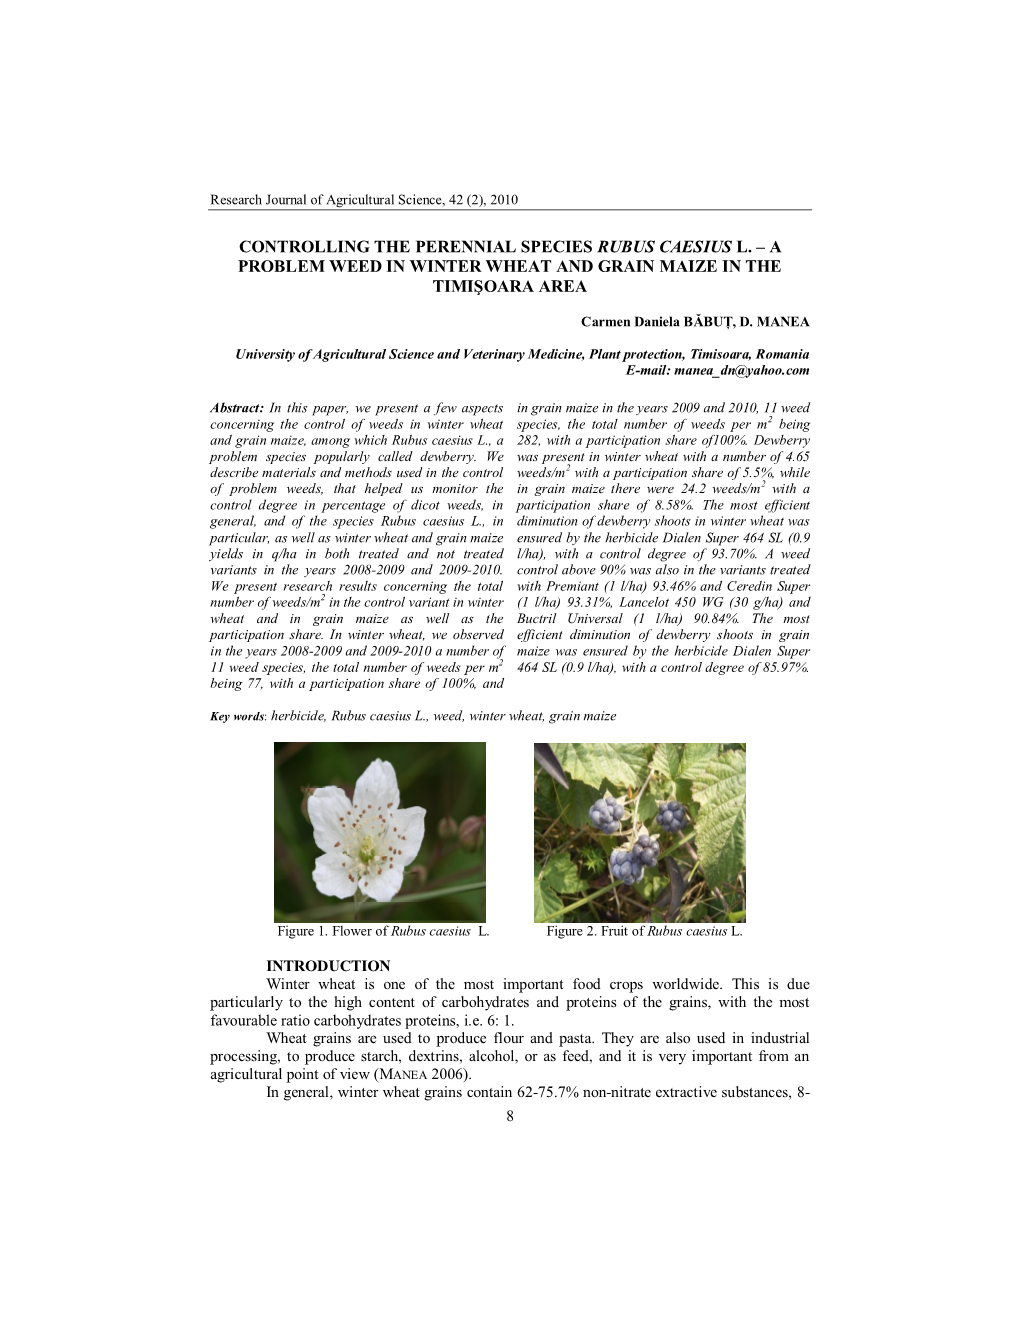 Controlling the Perennial Species Rubus Caesius L. – a Problem Weed in Winter Wheat and Grain Maize in the Timişoara Area